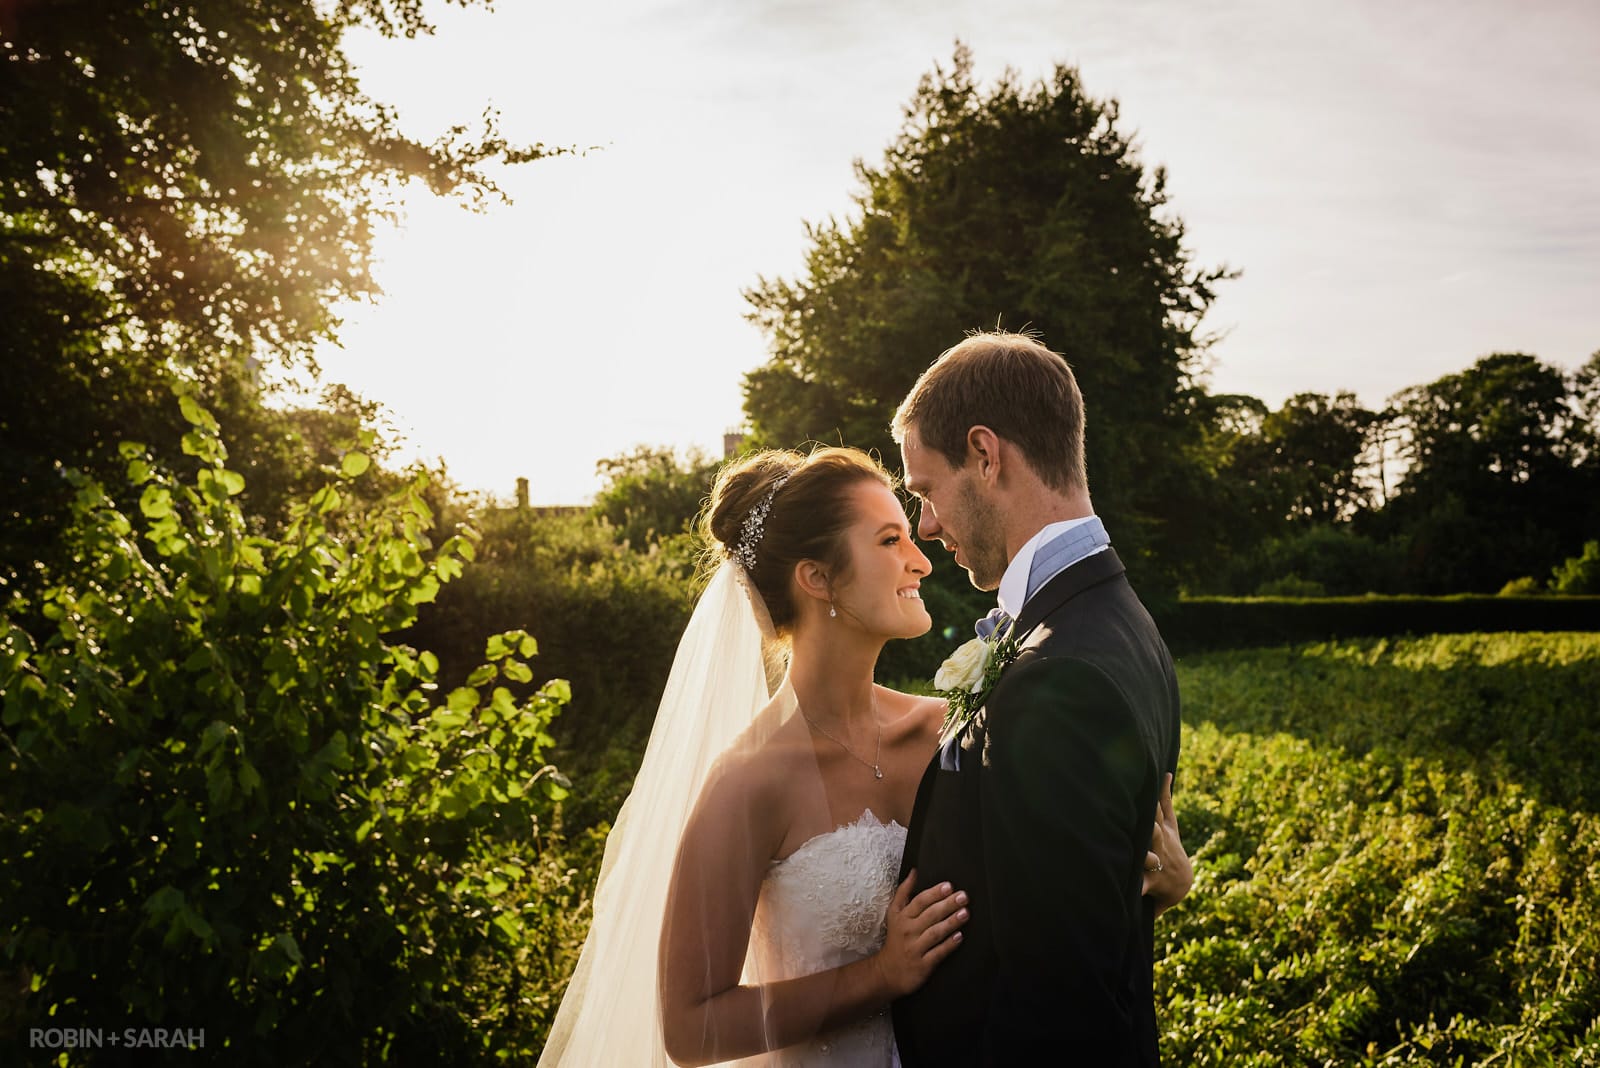 Bride and groom enjoying some time together in beautiful gardens on a summer evening